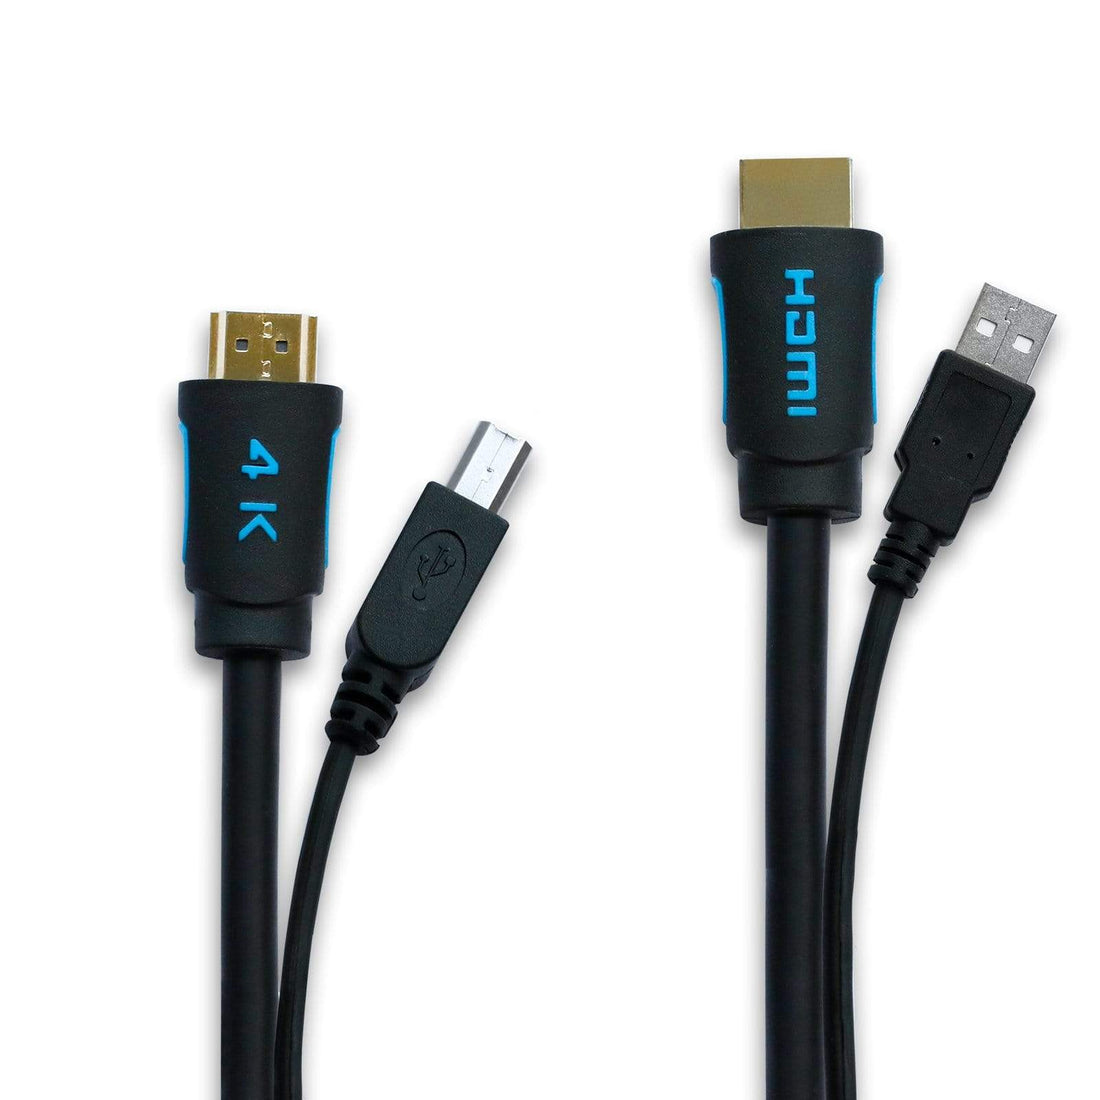 TESmart 2 Pcs 5ft Standard Twin Cable HDMI + USB KVM Cable USB Type A to USB Type B (2 Pcs/Lot USB + HDMI Cables) - image 1 of 6